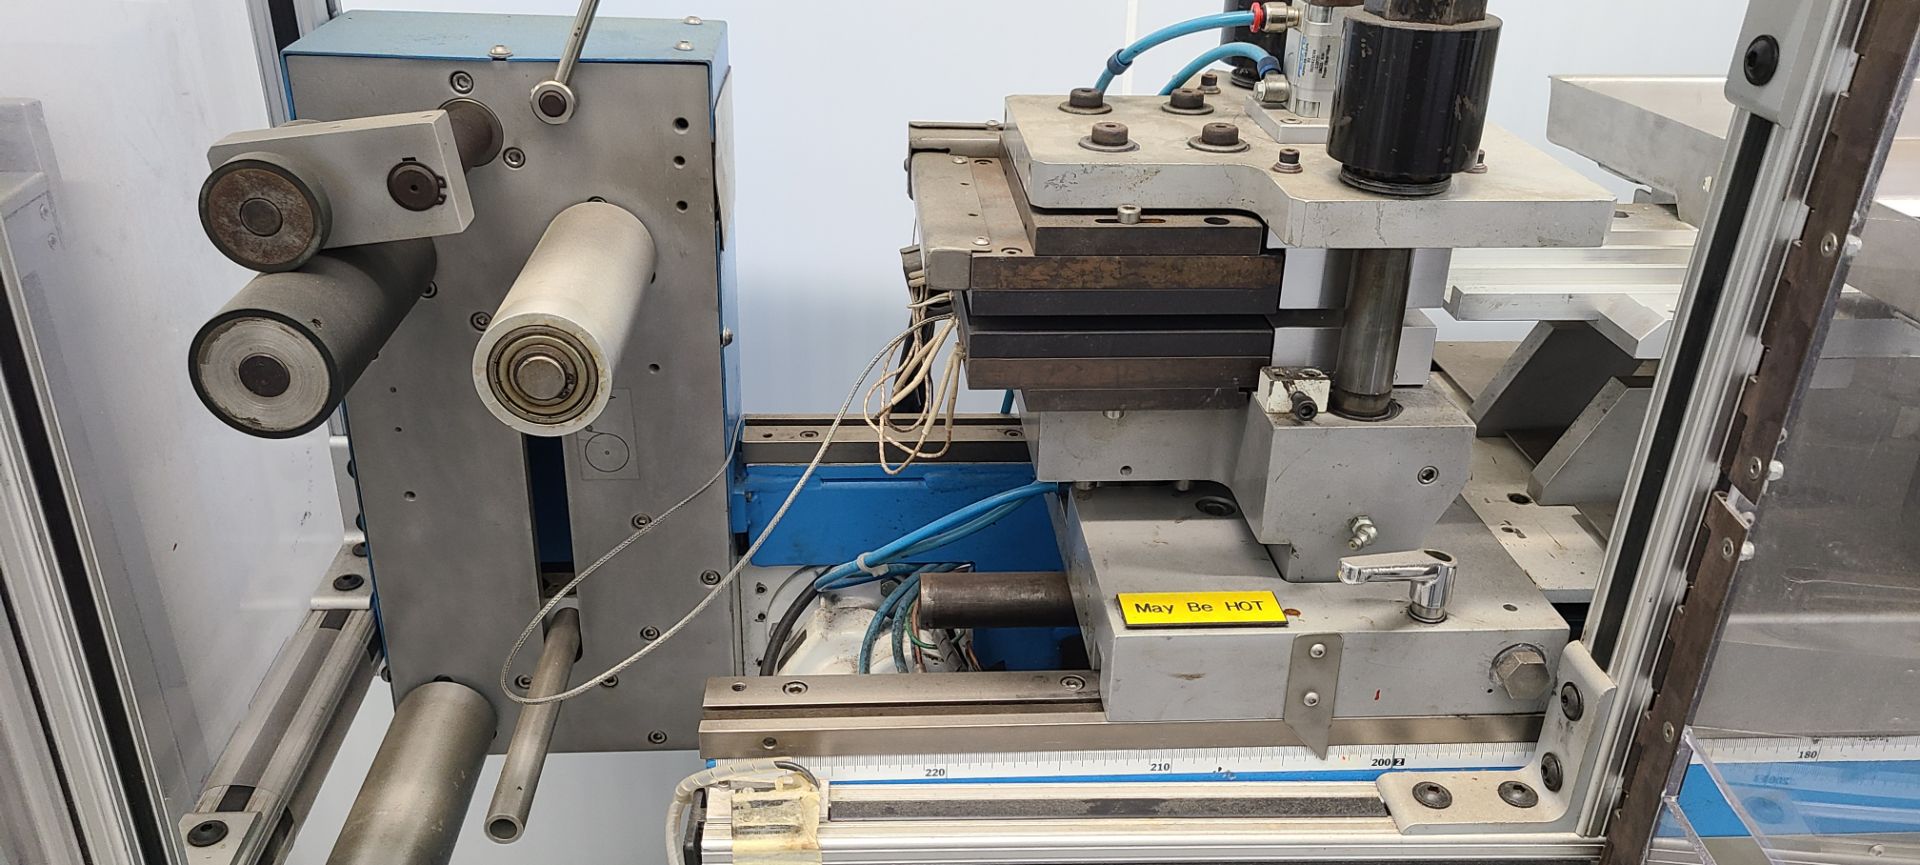 PM-4 Blister Pack Machine with Film/Tooling - Image 11 of 50